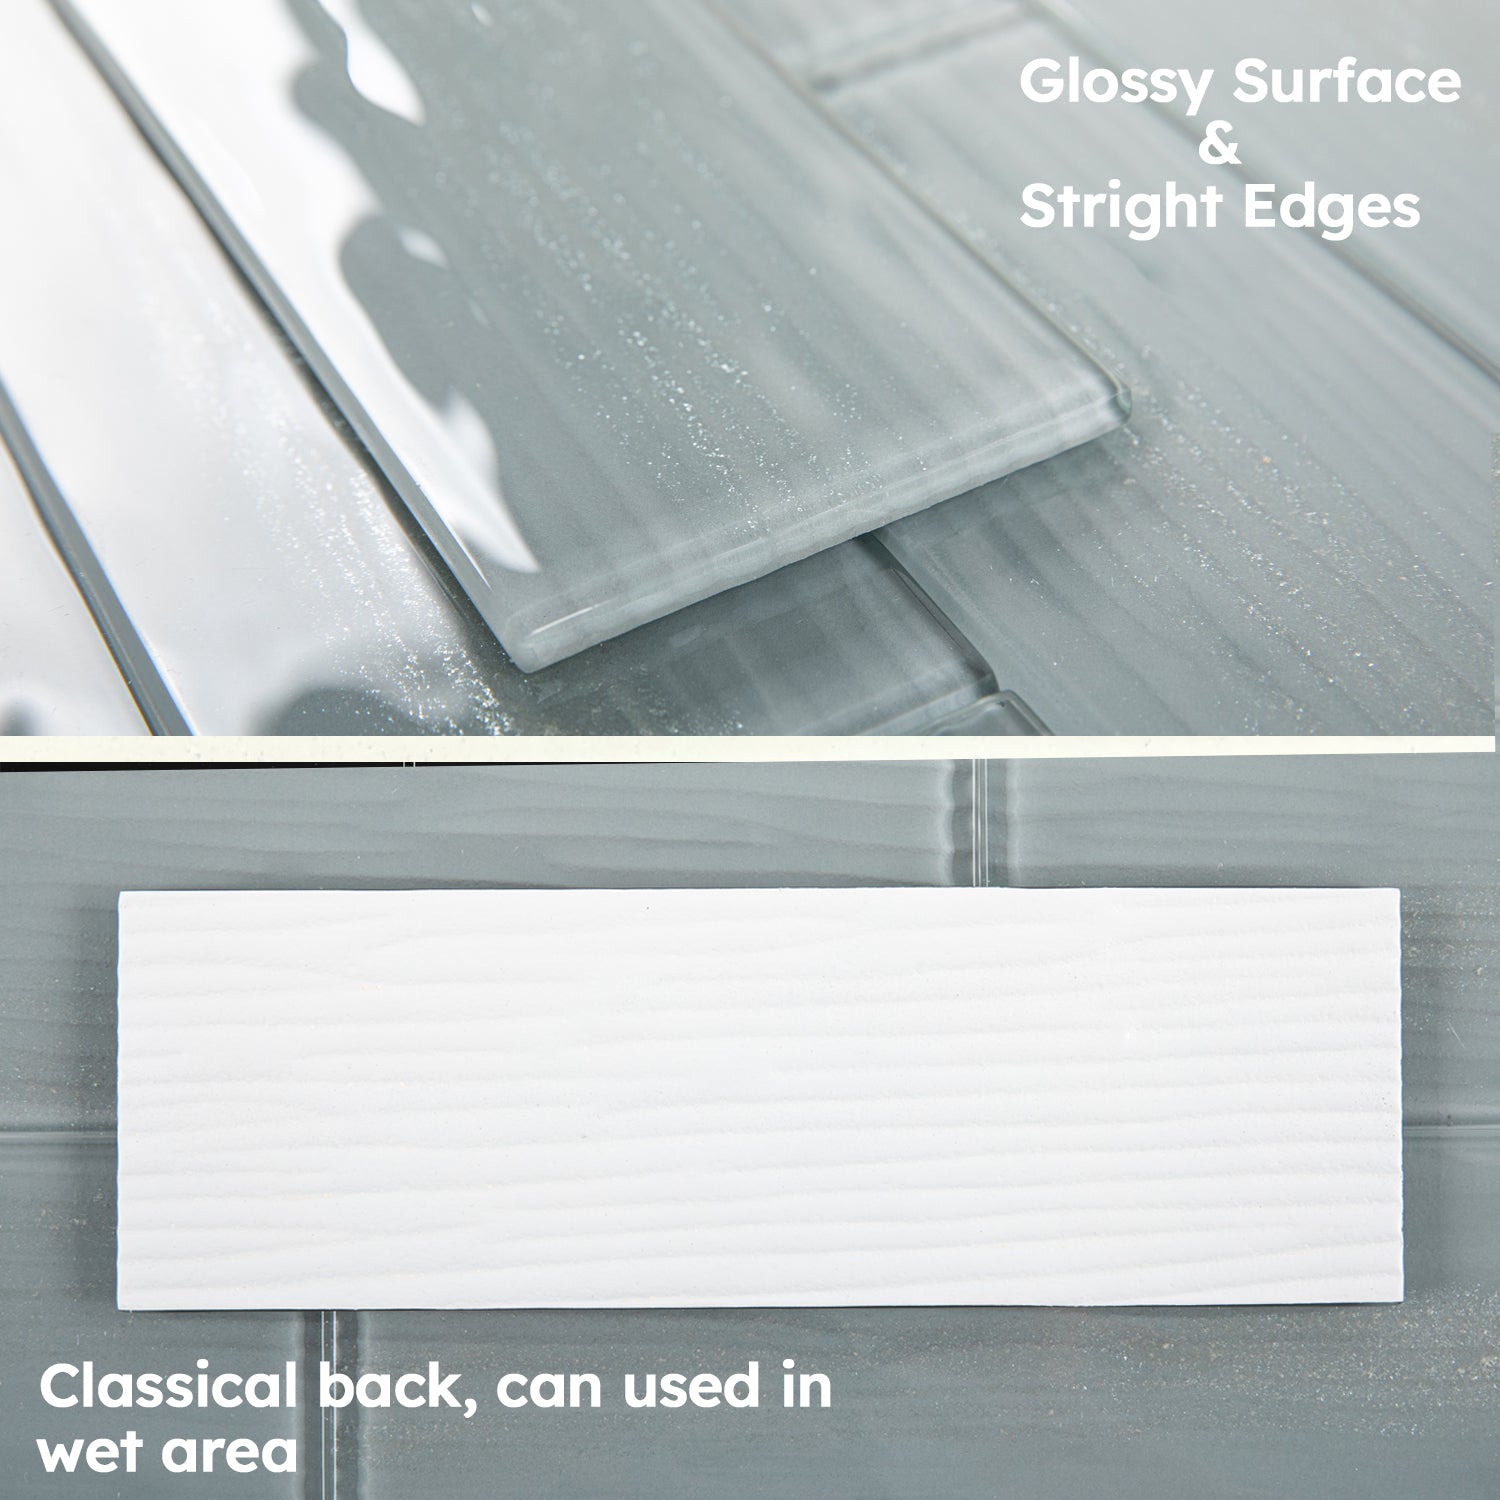 Glass Subway Tiles, Grey, 3x10 Inch, Glossy, Textured, Sparkling Surface